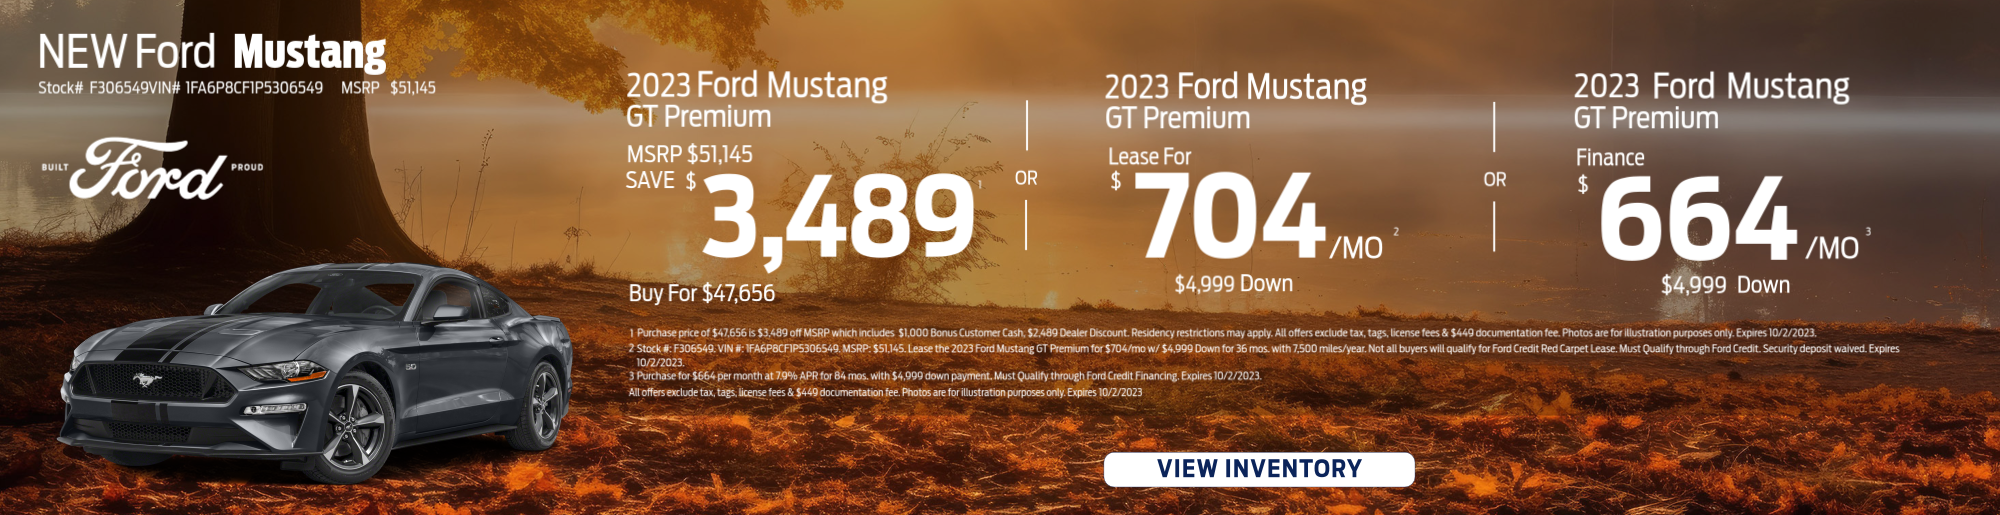 Ford Mustang Special Offer